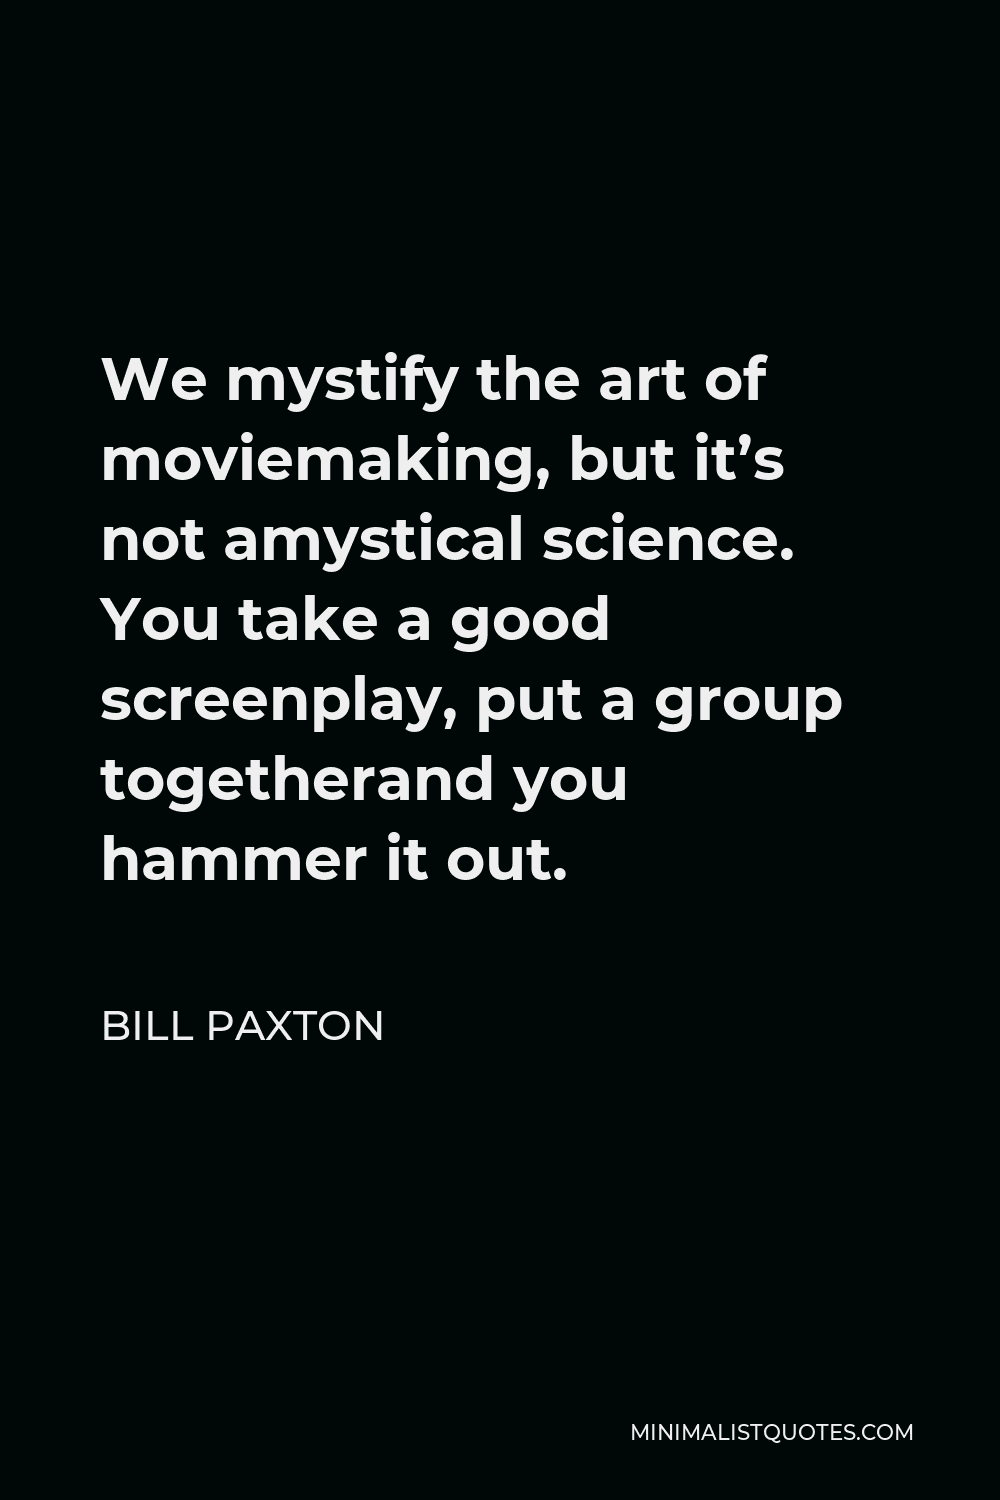 Bill Paxton Quote - We mystify the art of moviemaking, but it’s not amystical science. You take a good screenplay, put a group togetherand you hammer it out.